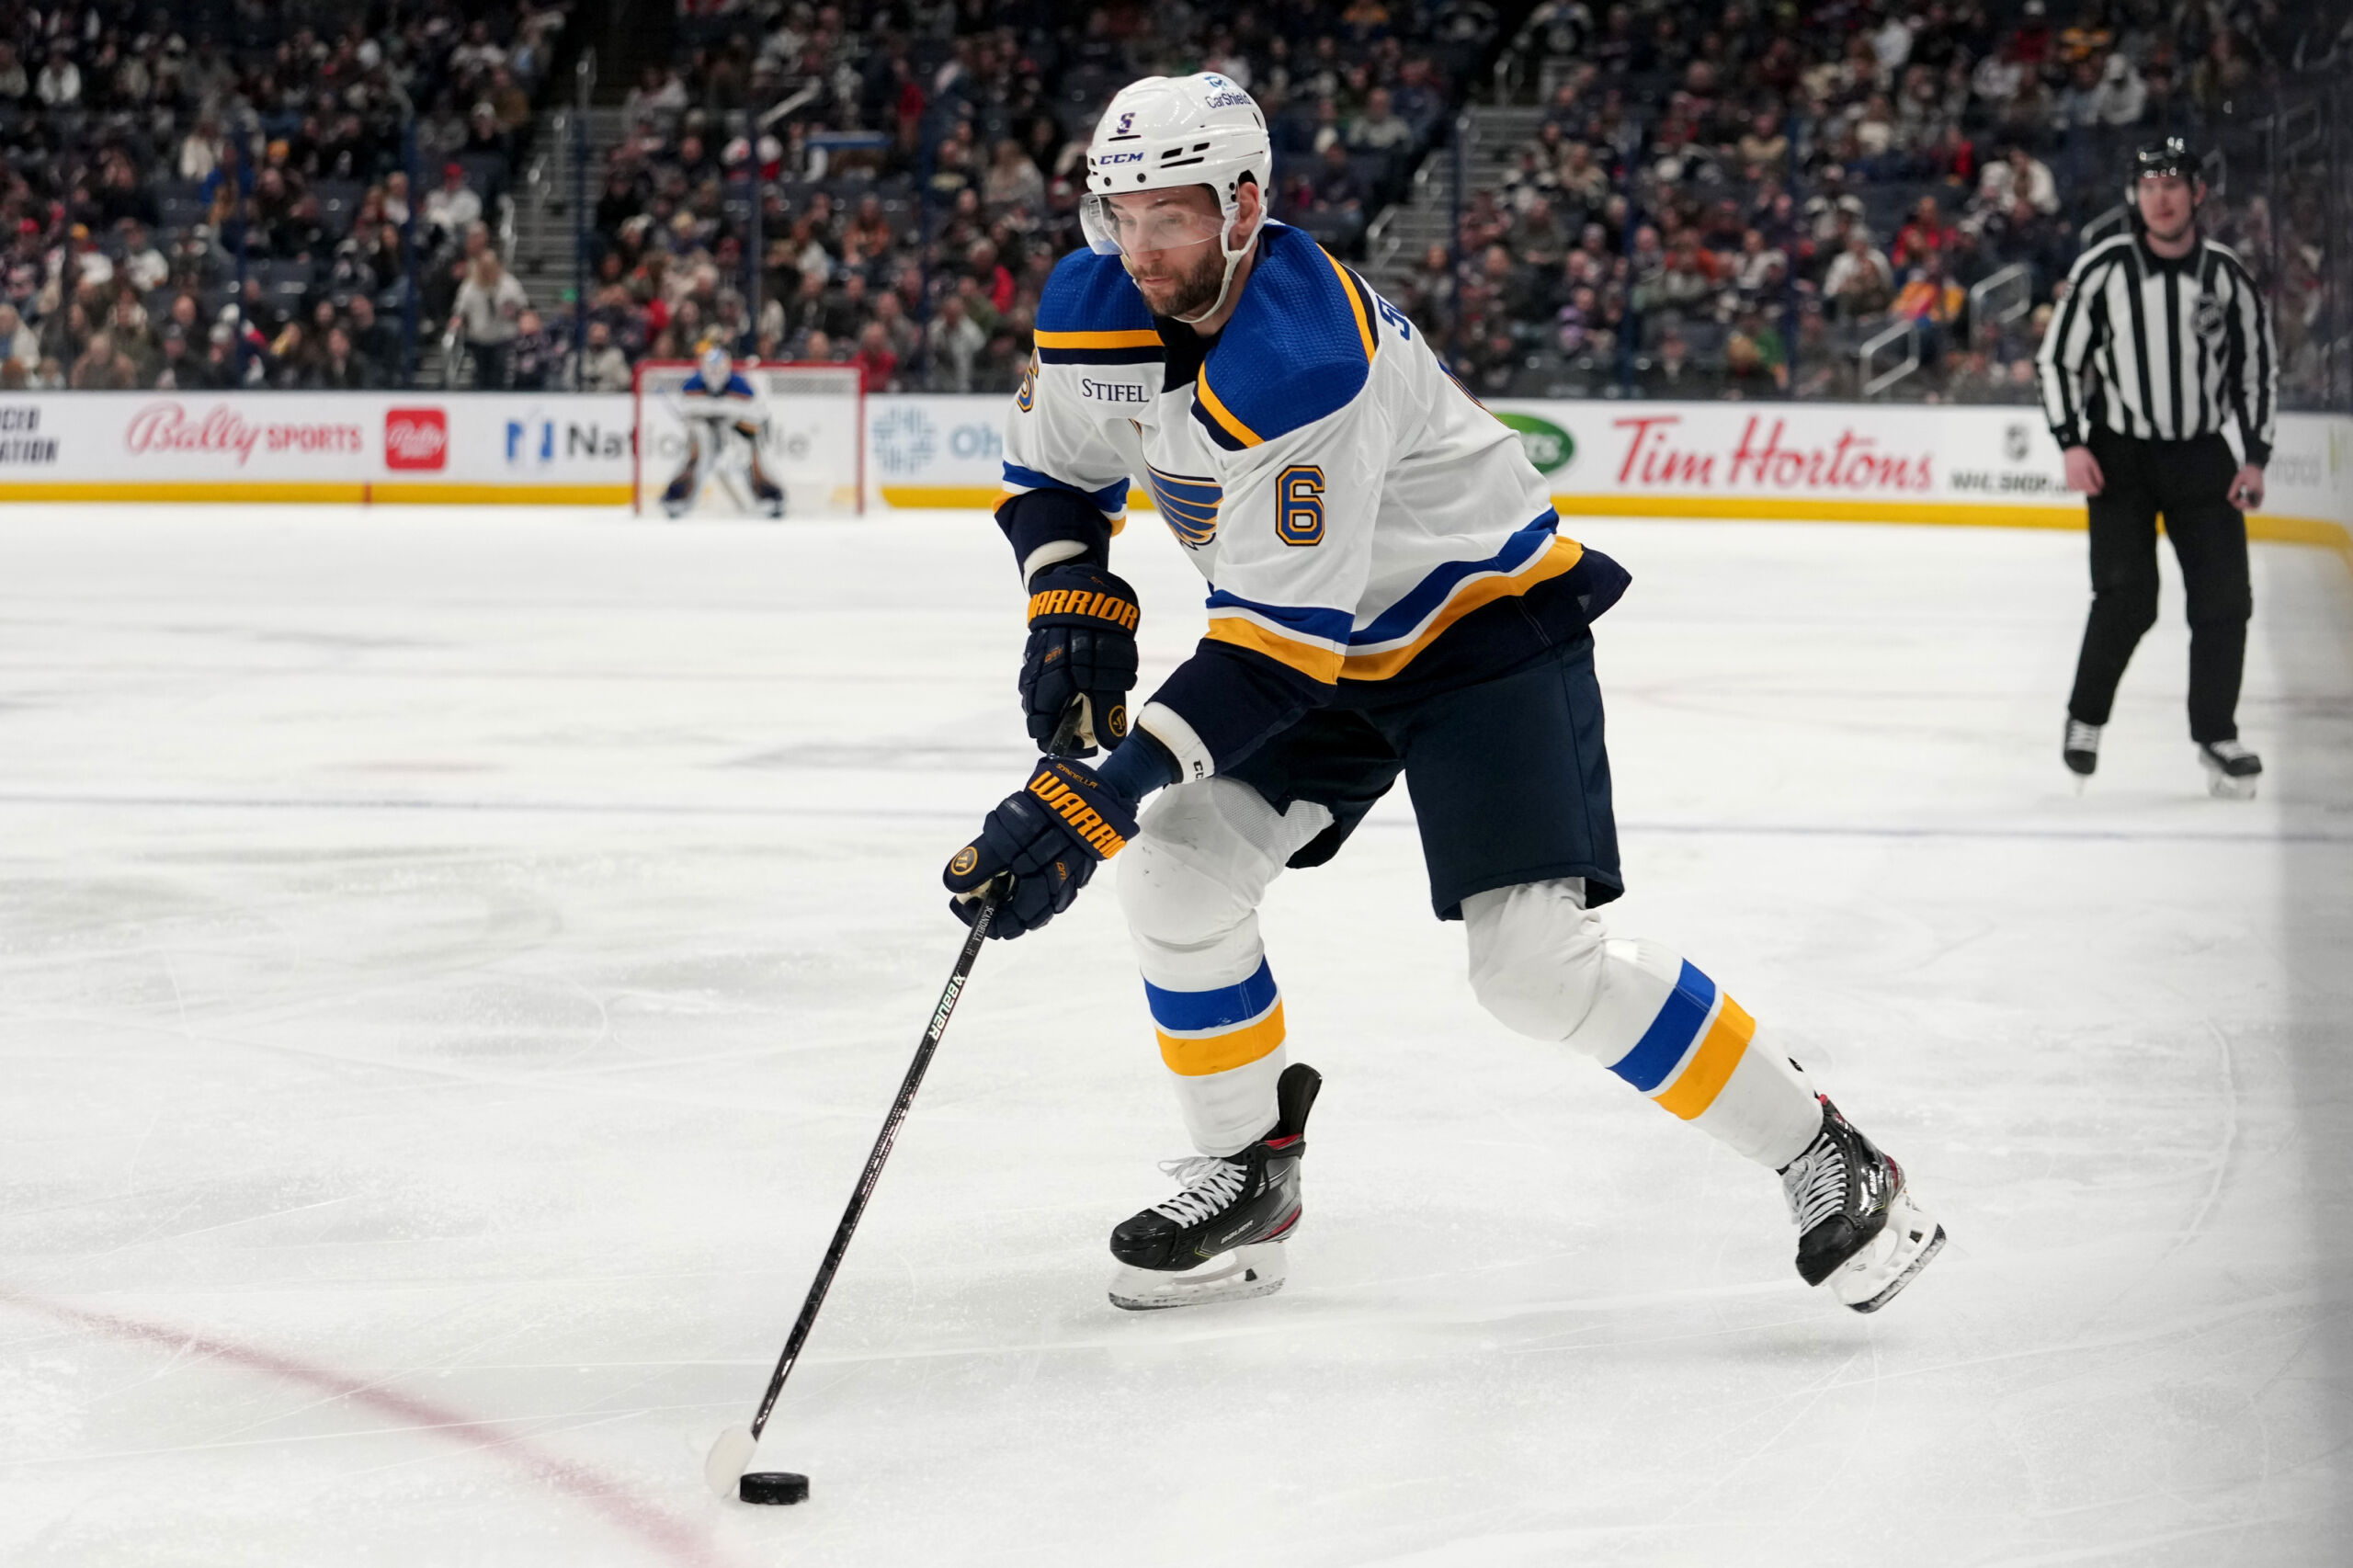 St. Louis Blues on X: Marco Scandella gets a high-stick to the